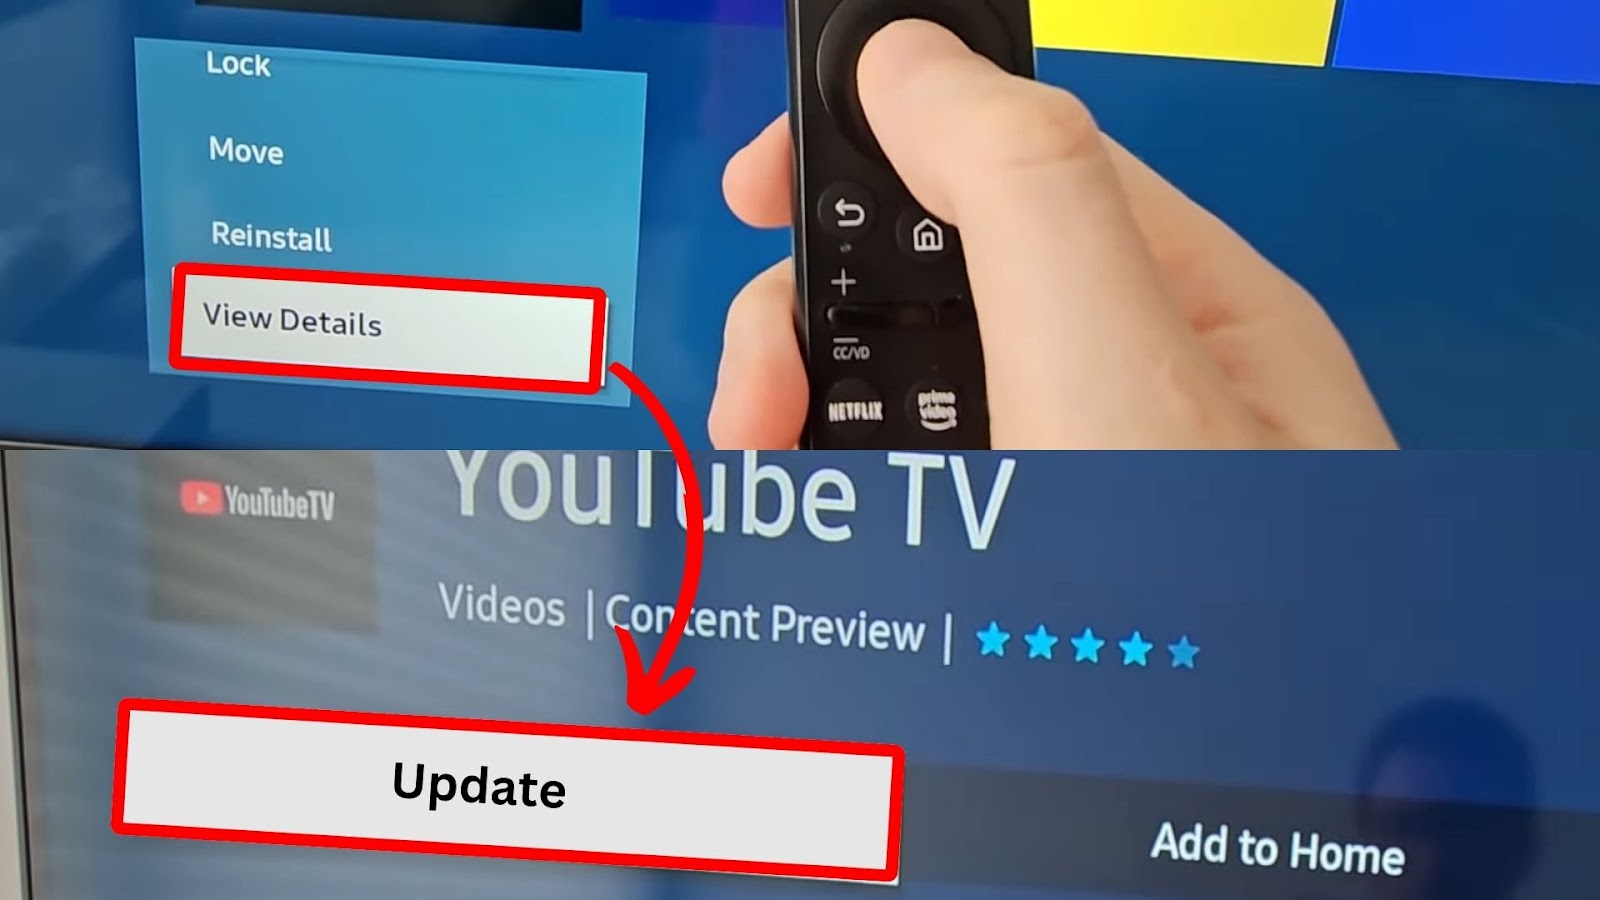 How to Update YouTube TV on Samsung TV